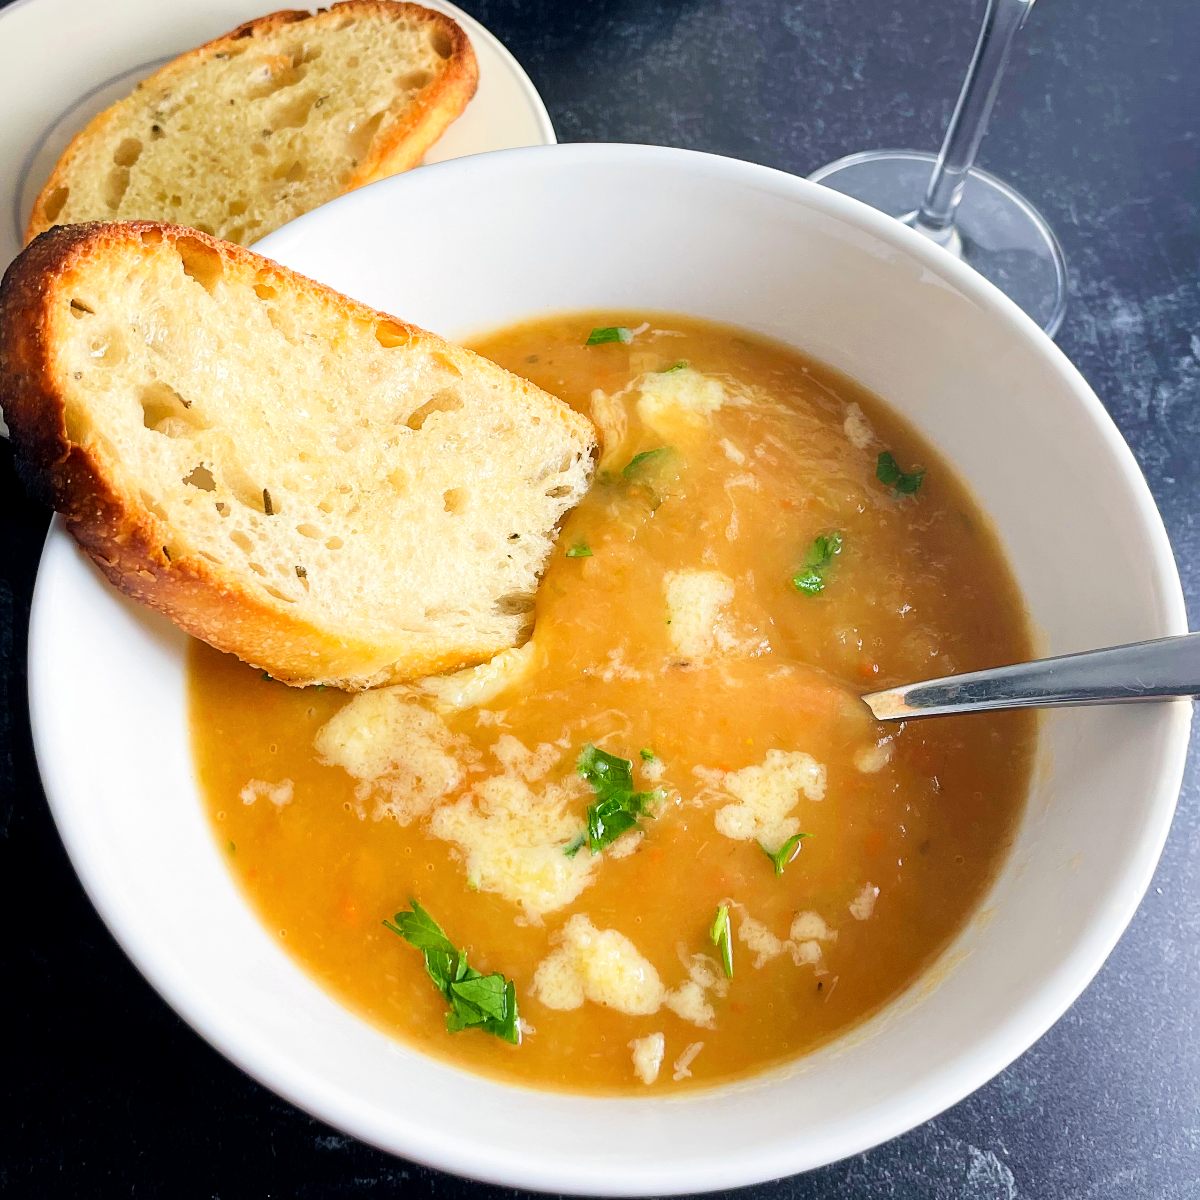 Irish vegetable soup in a white bowl and a side of bread.